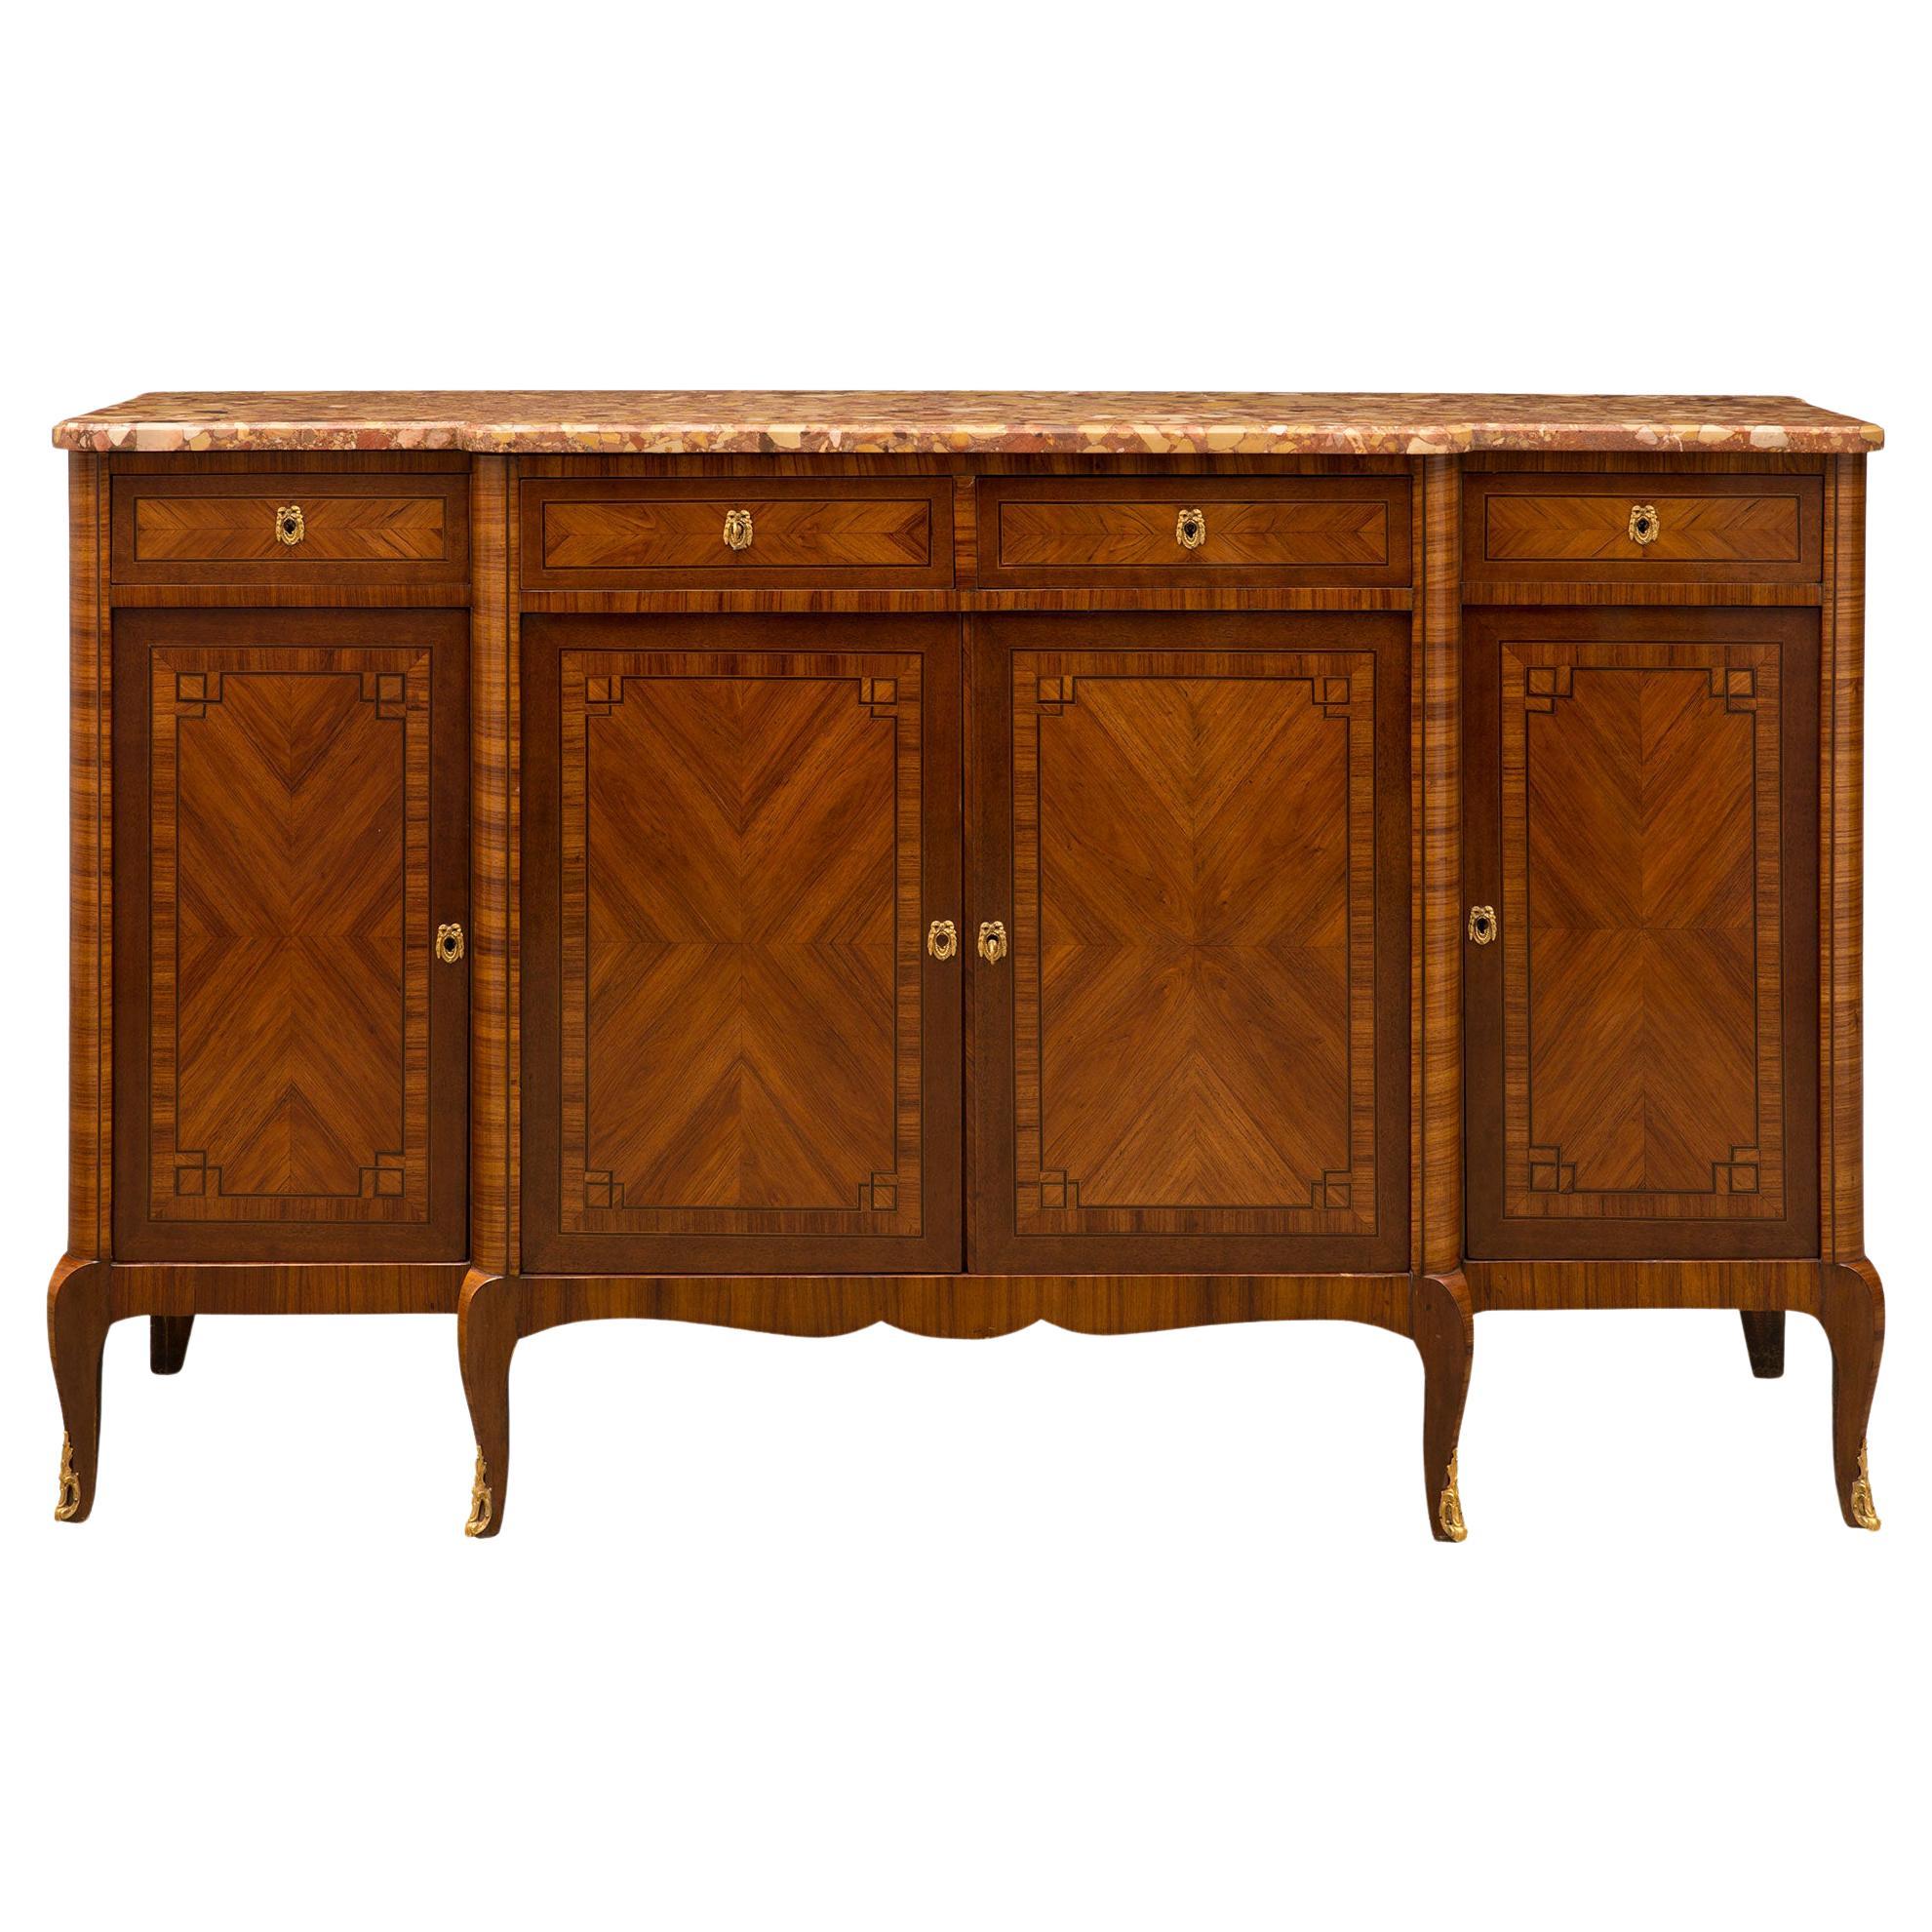 French 19th Century Transitional Style Tulipwood, Kingwood and Marble Buffet For Sale